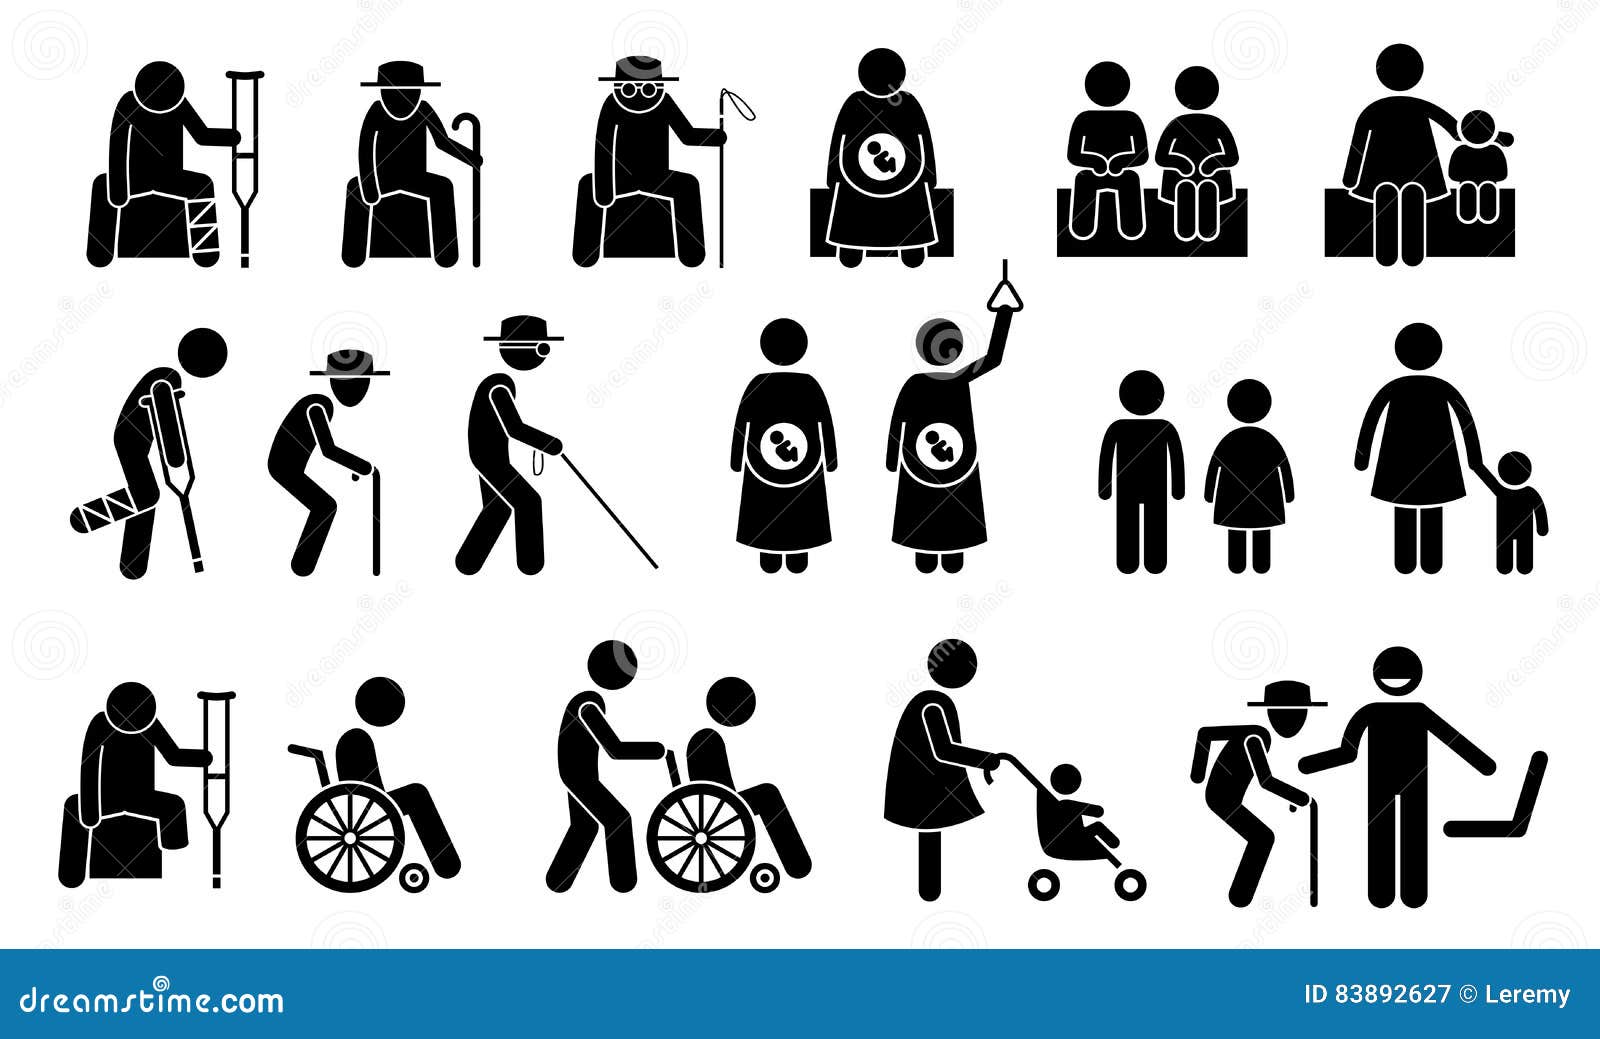 Priority Seats Sign Symbols Icons And Pictogram Stock Vector